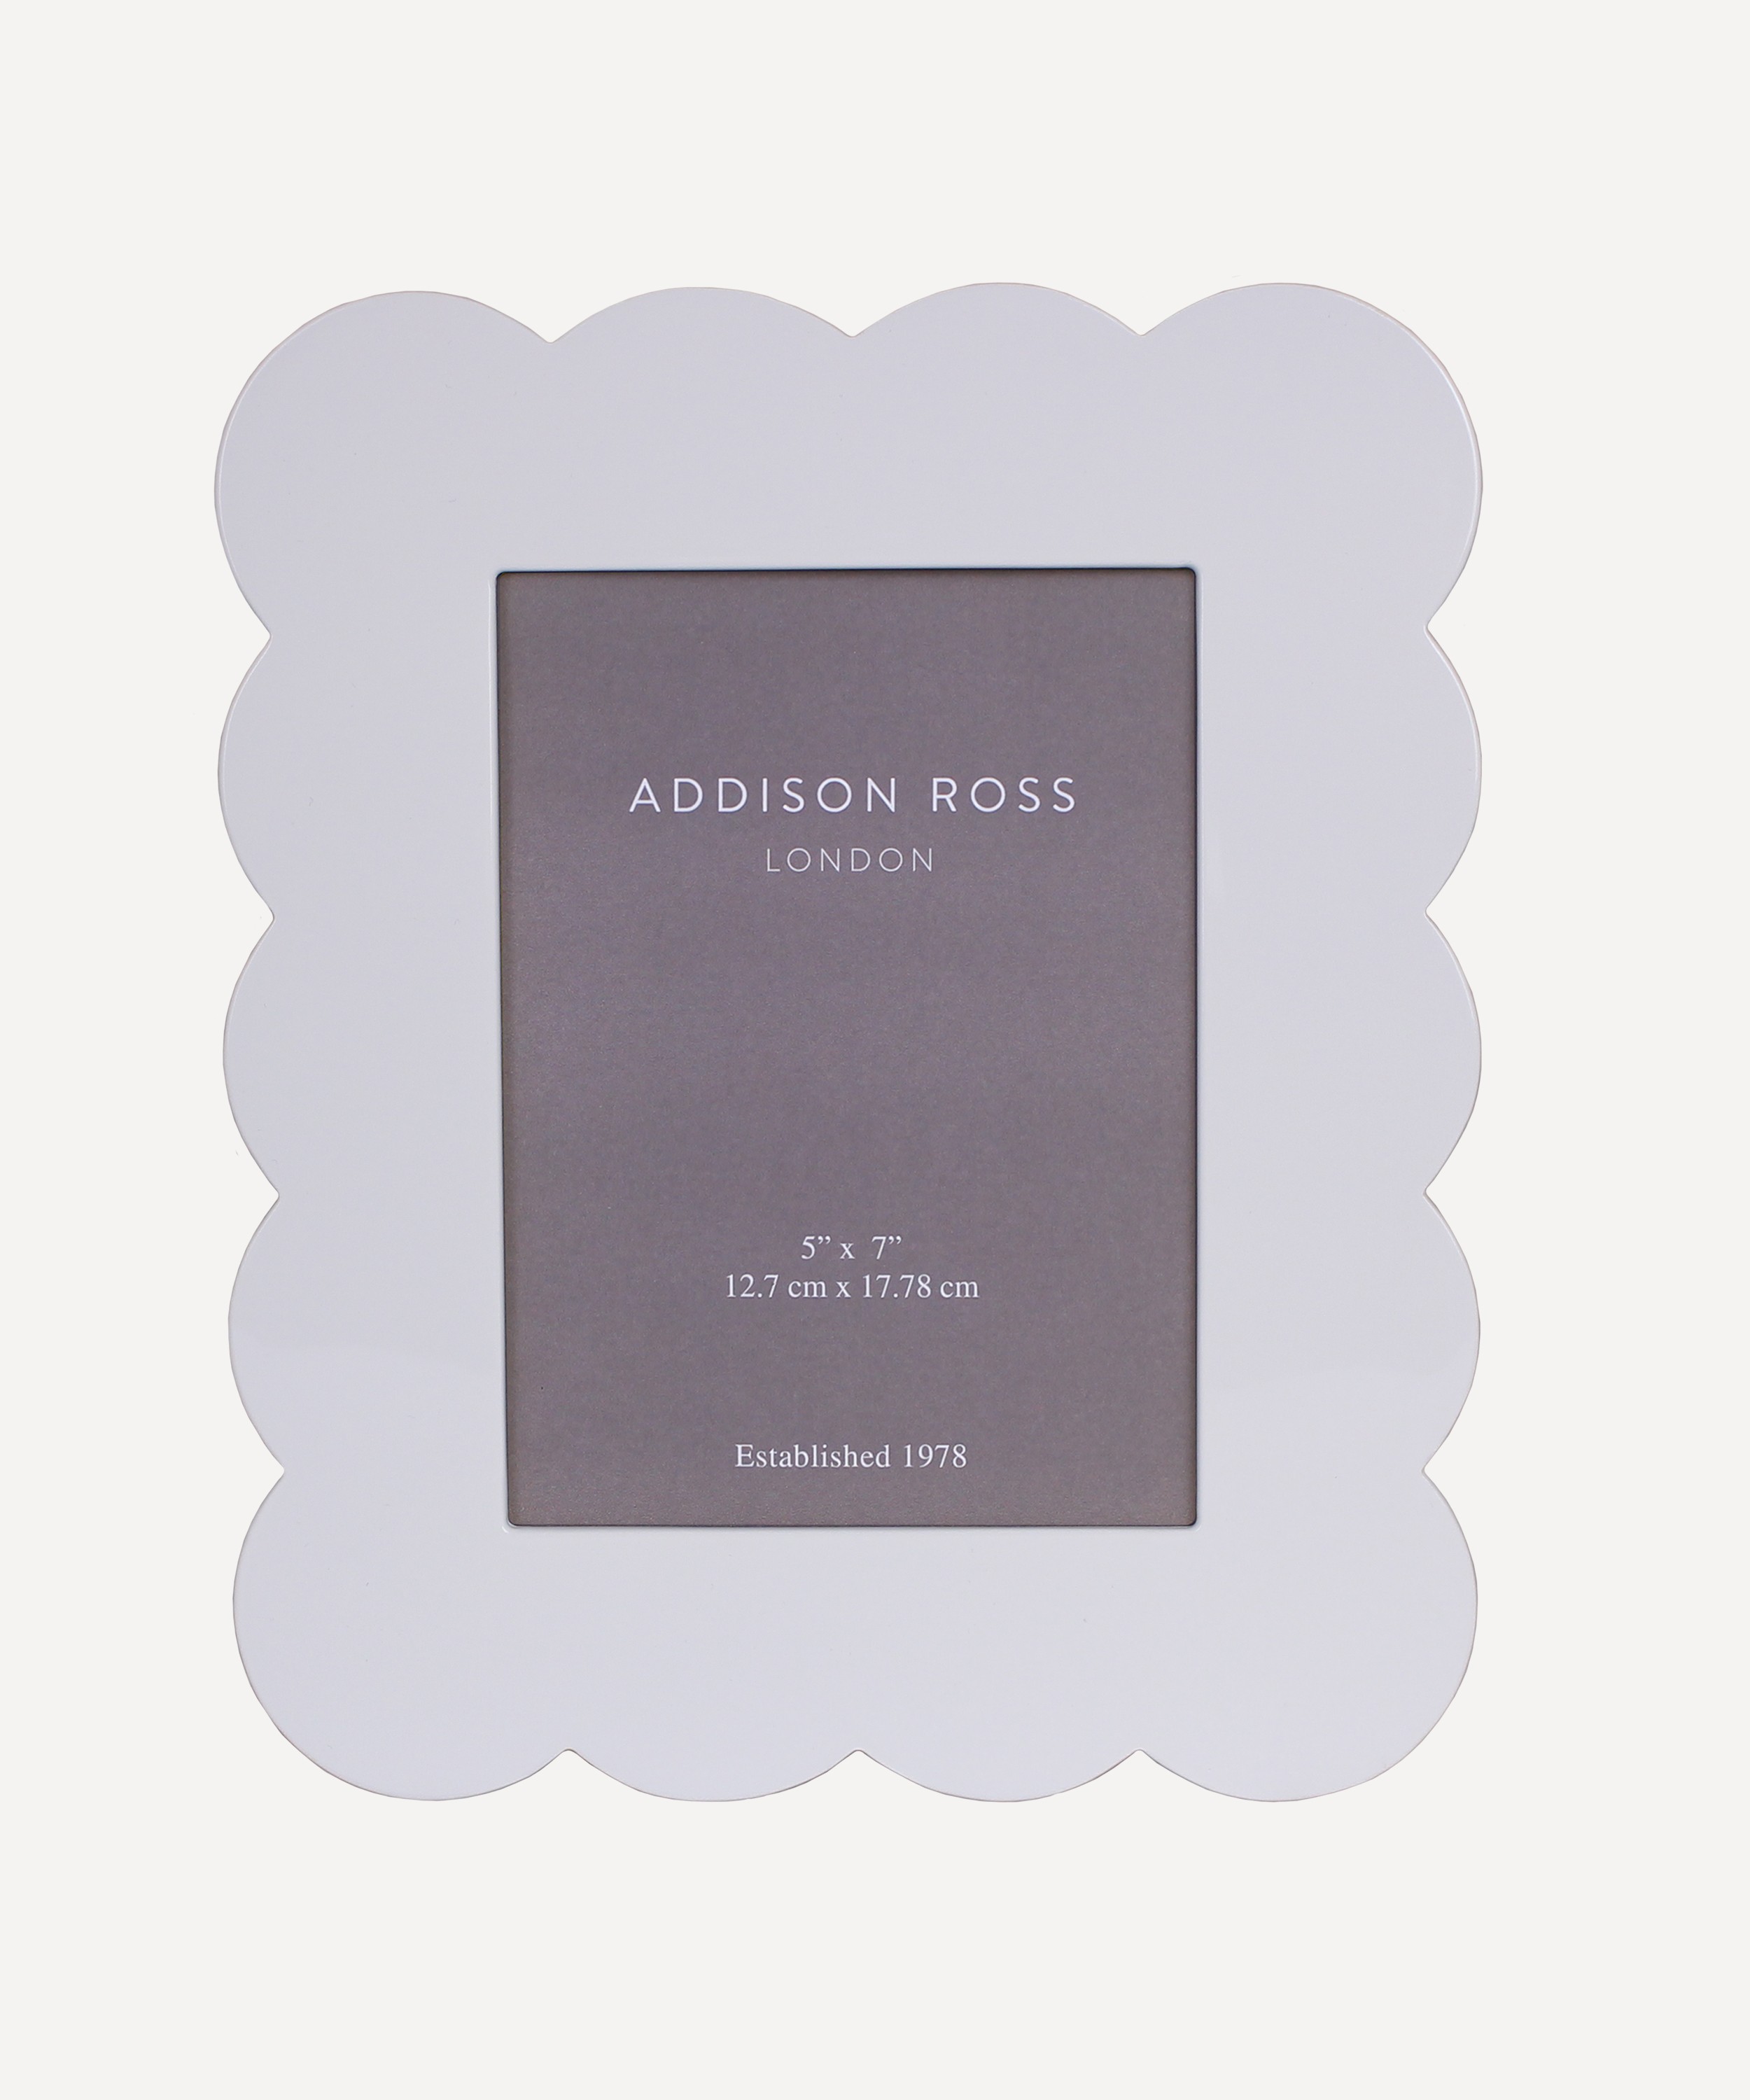 Addison Ross - White Scalloped Lacquer 5x7” Photo Frame image number 0